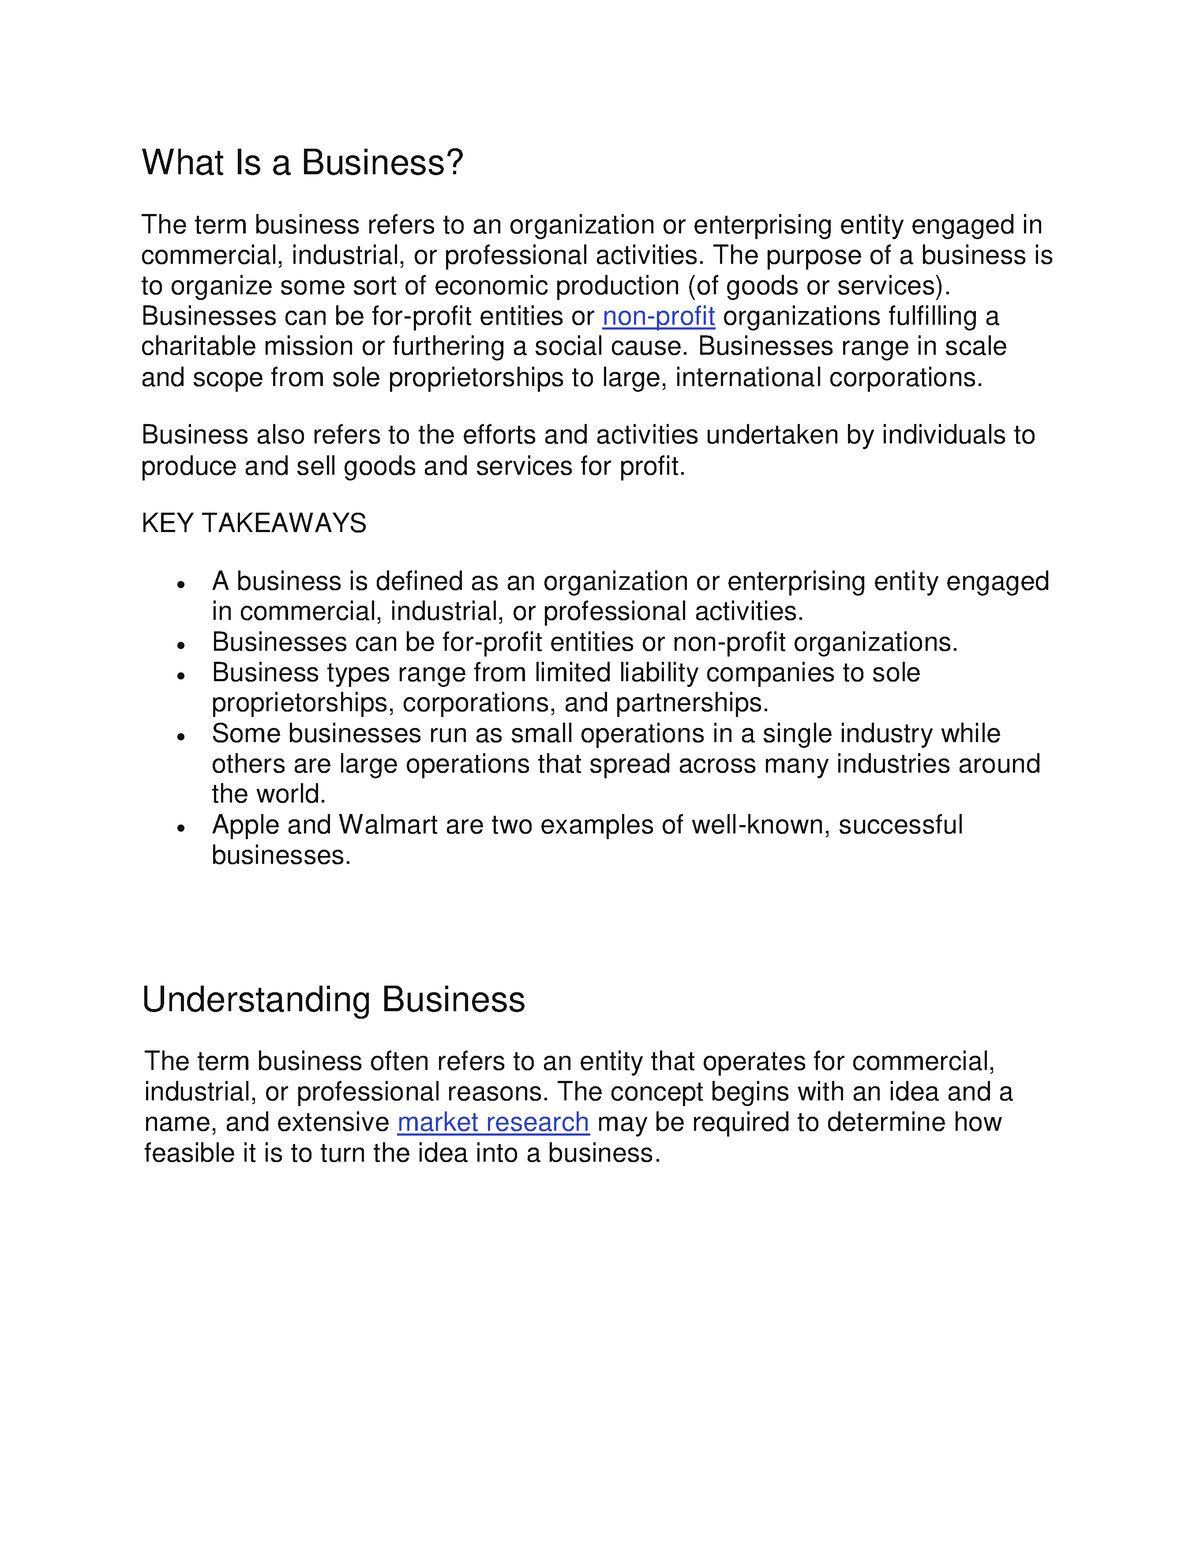 business-notes-what-is-a-business-the-term-business-refers-to-an